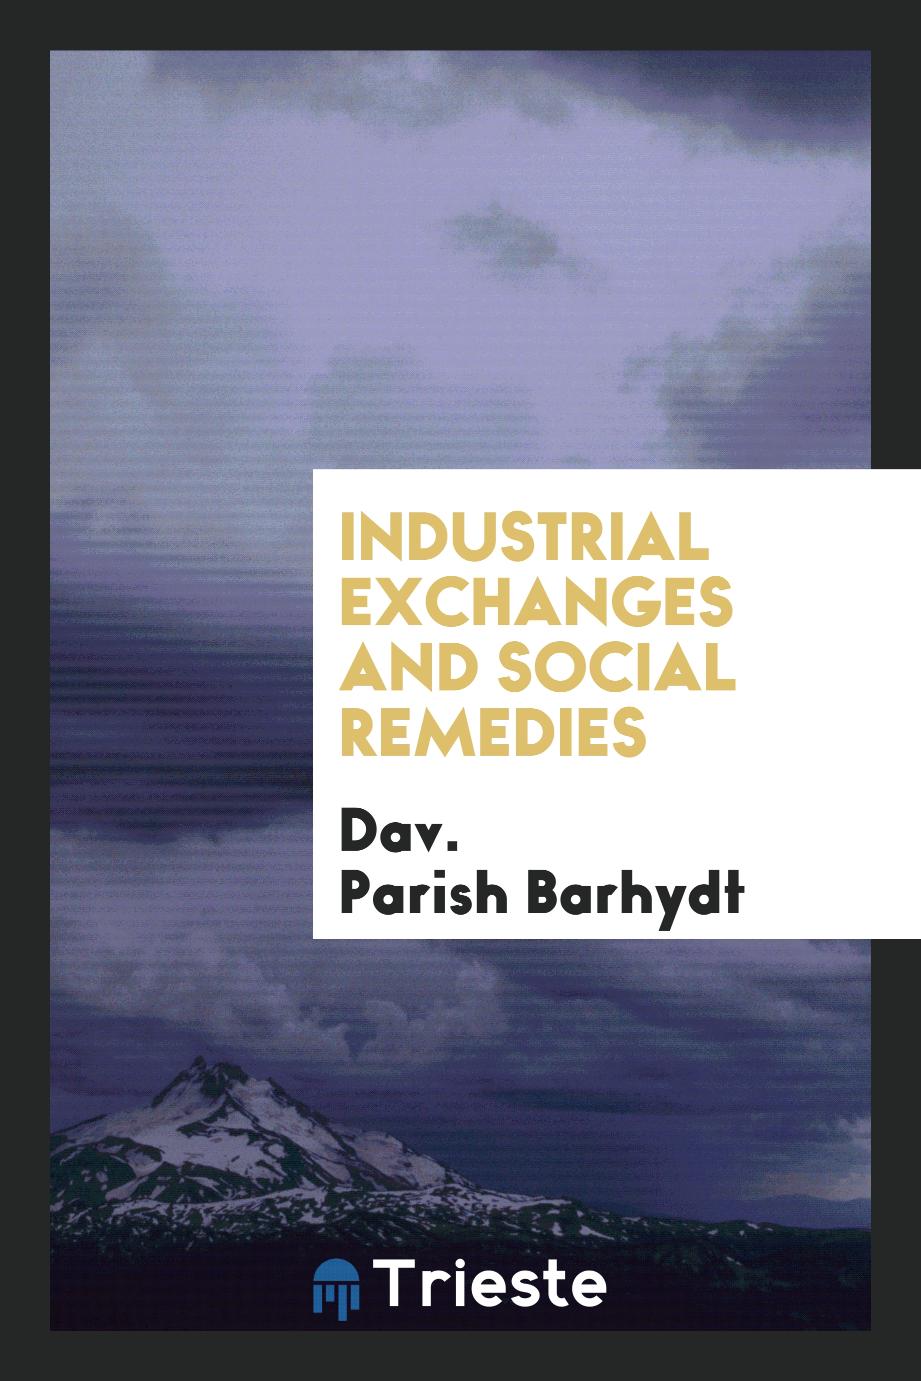 Industrial exchanges and social remedies